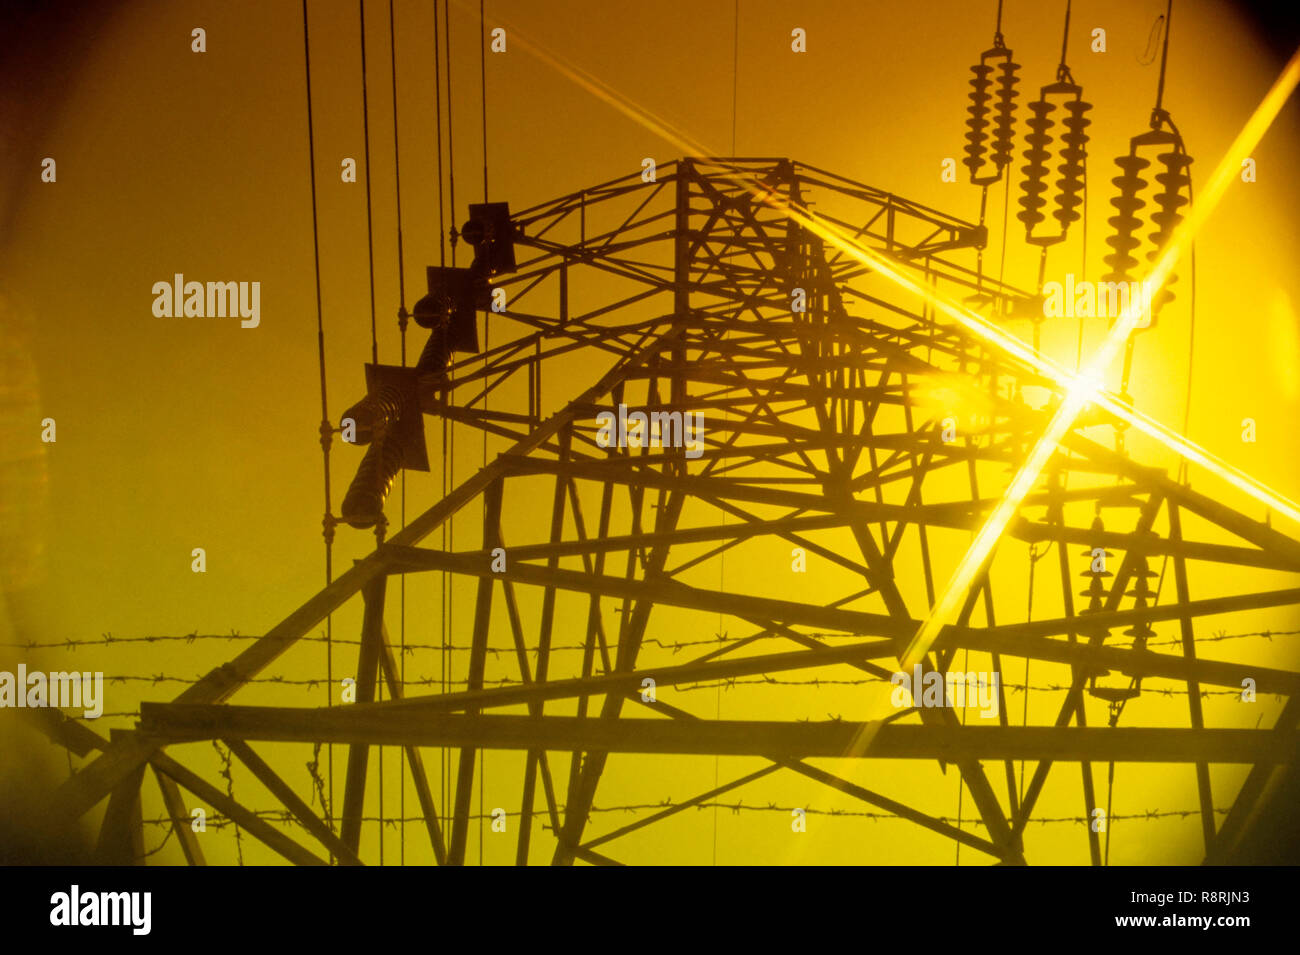 transmission tower, power tower, electricity pylon, tall structure, steel lattice tower, overhead power line, India, Asia Stock Photo